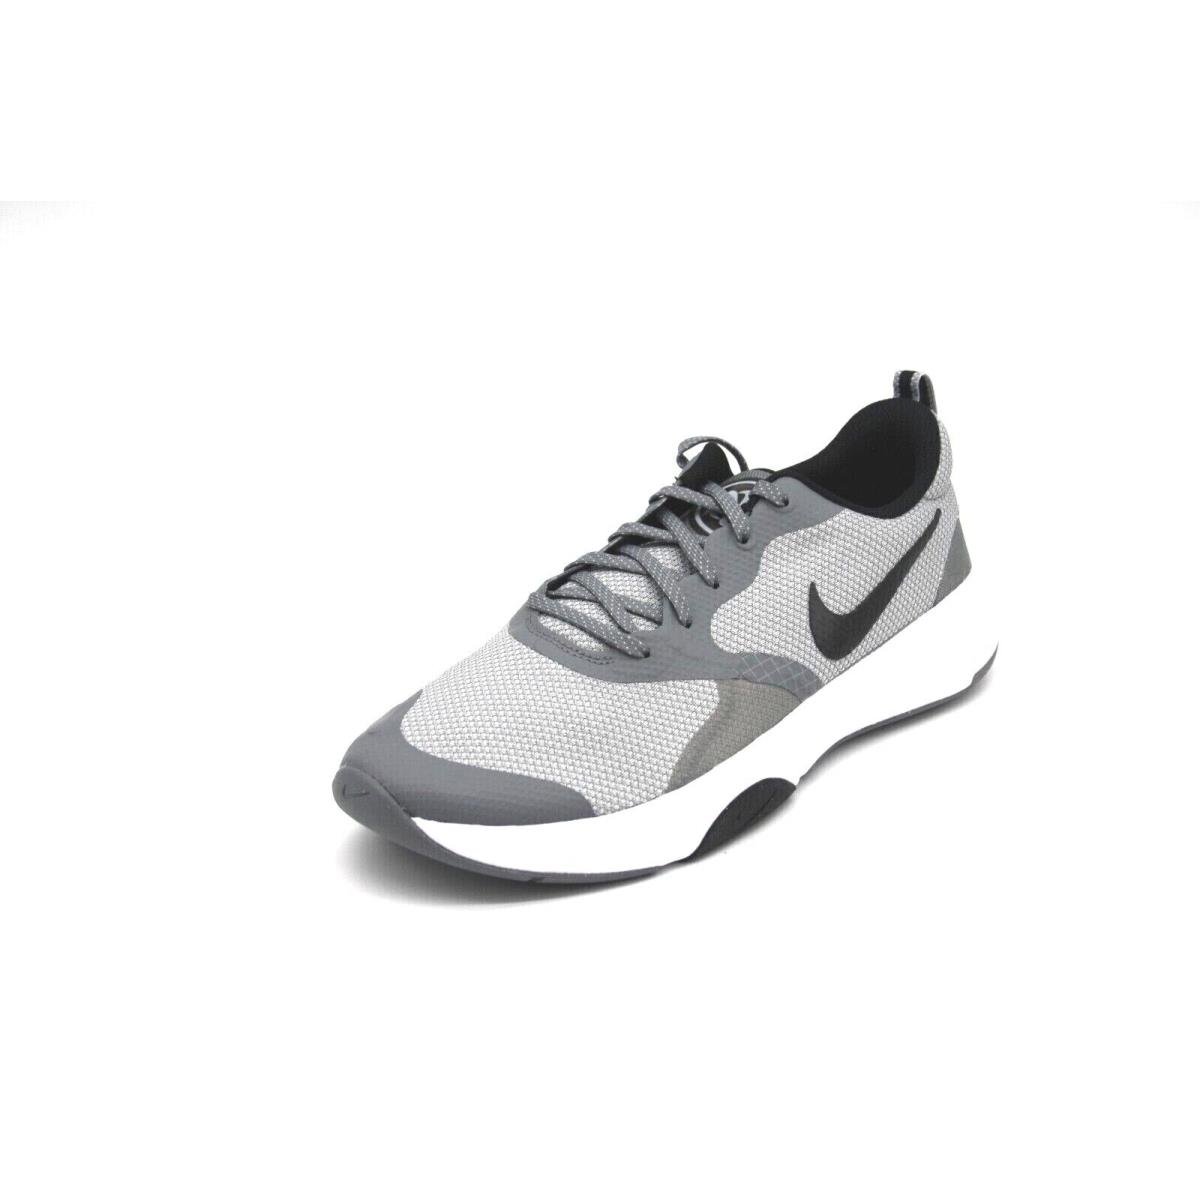 Nike shoes City Rep - Wolf Grey/Cool Grey/White/Black 0